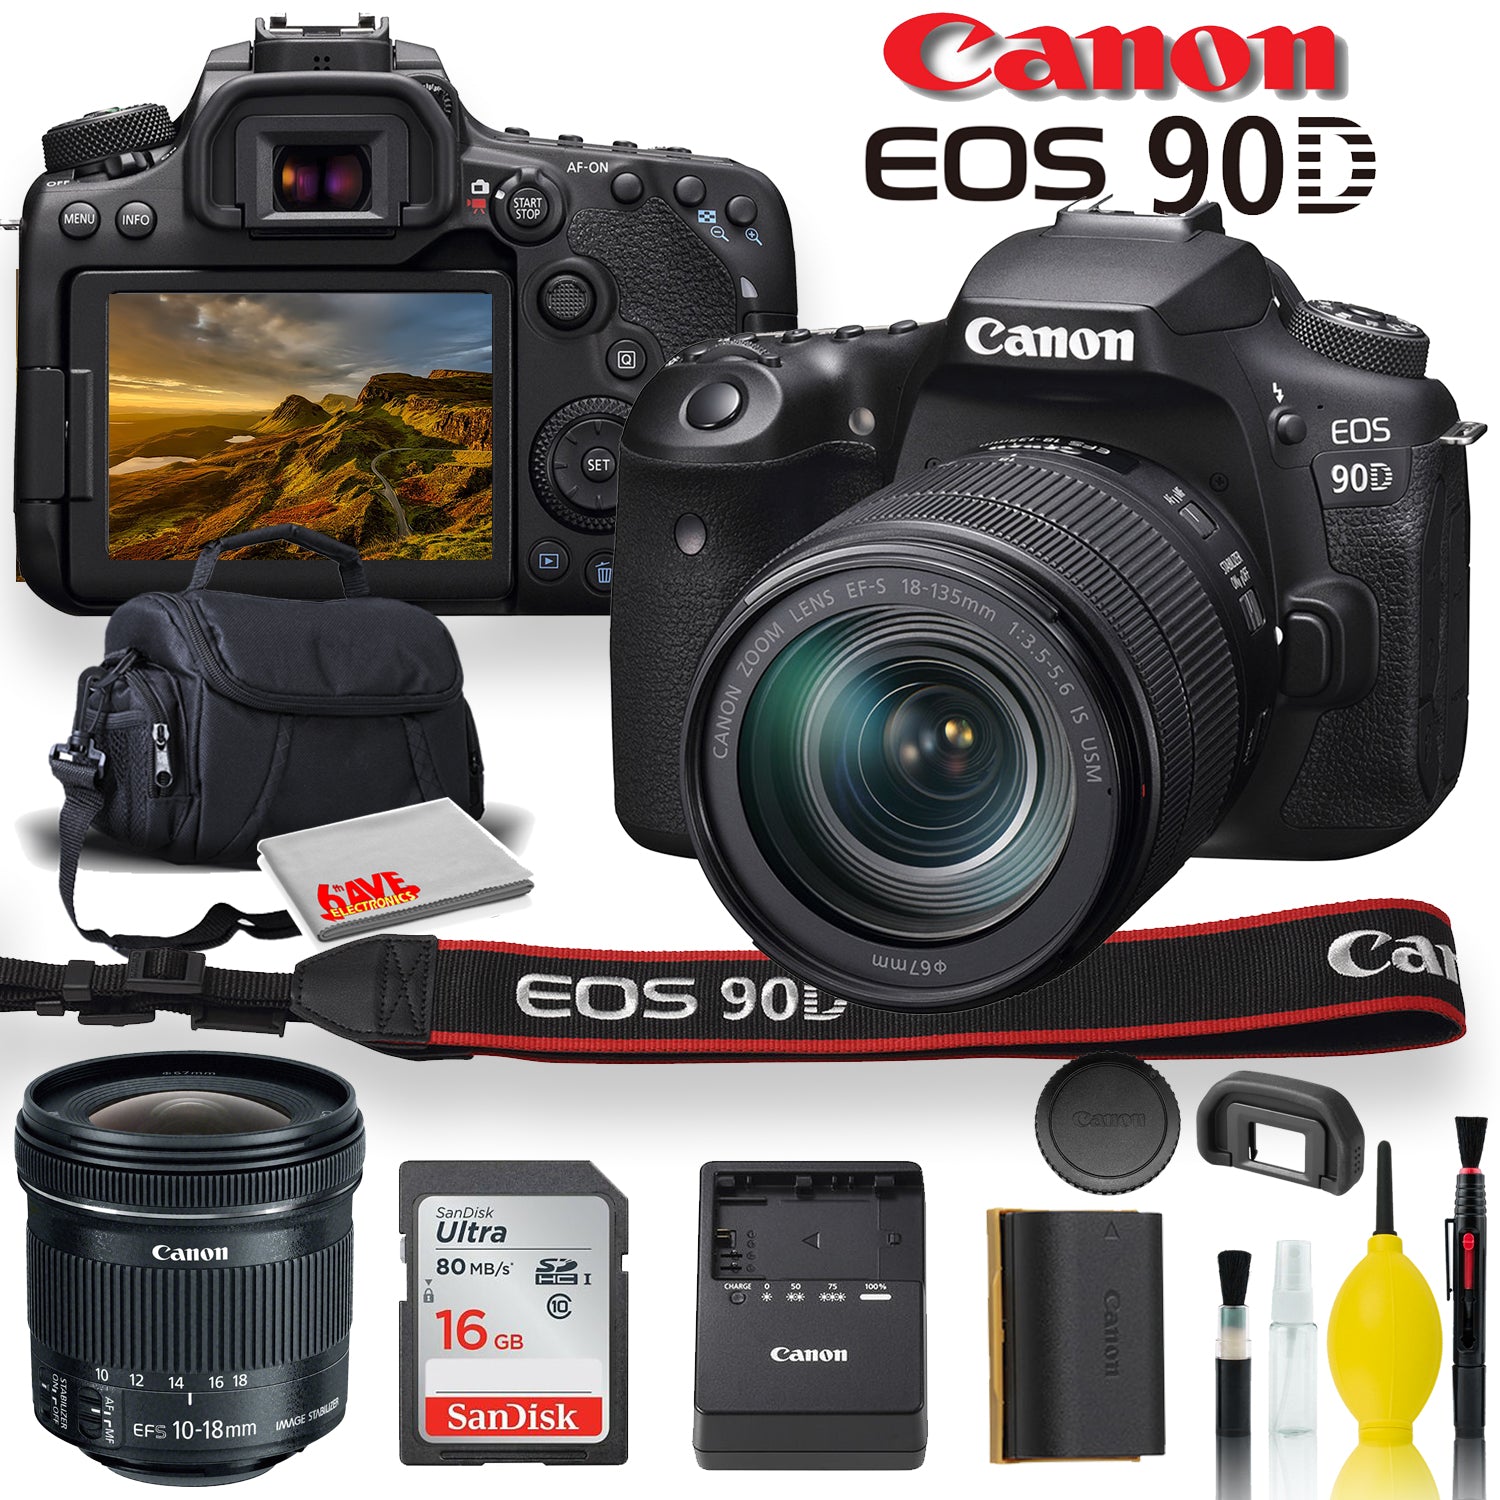 Canon EOS 90D DSLR Camera With 18-135mm Lens, Canon EF-S 10-18mm f/4.5-5.6 IS STM Lens, Soft Padded Case, Memory Card, and More